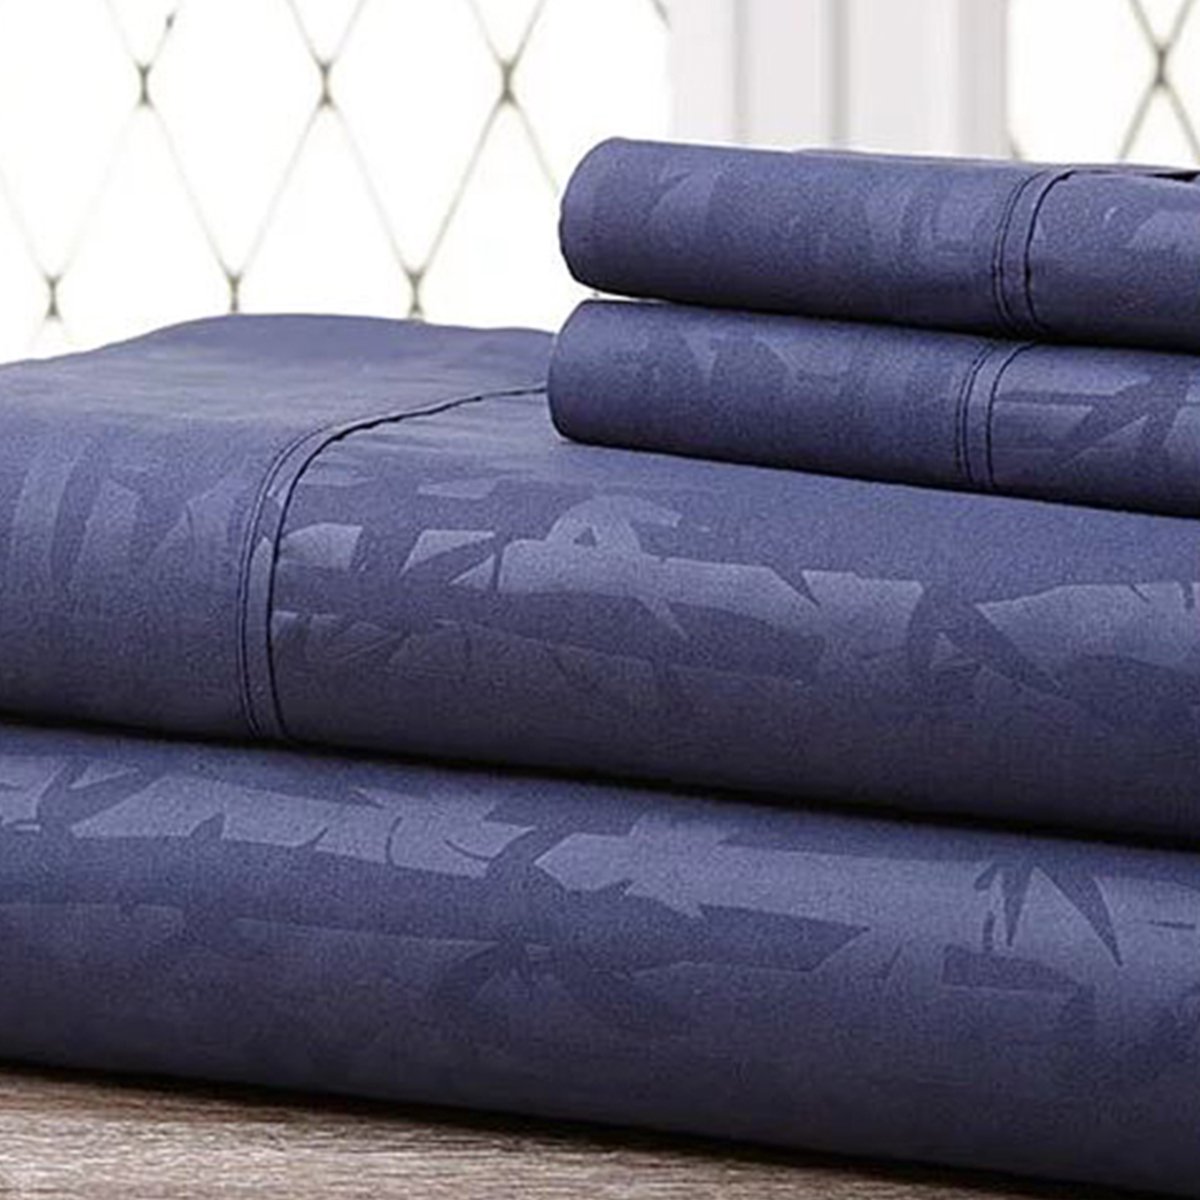 Super-soft 1600 Series Bamboo Embossed Bed Sheet, Navy - Full, 4 Piece